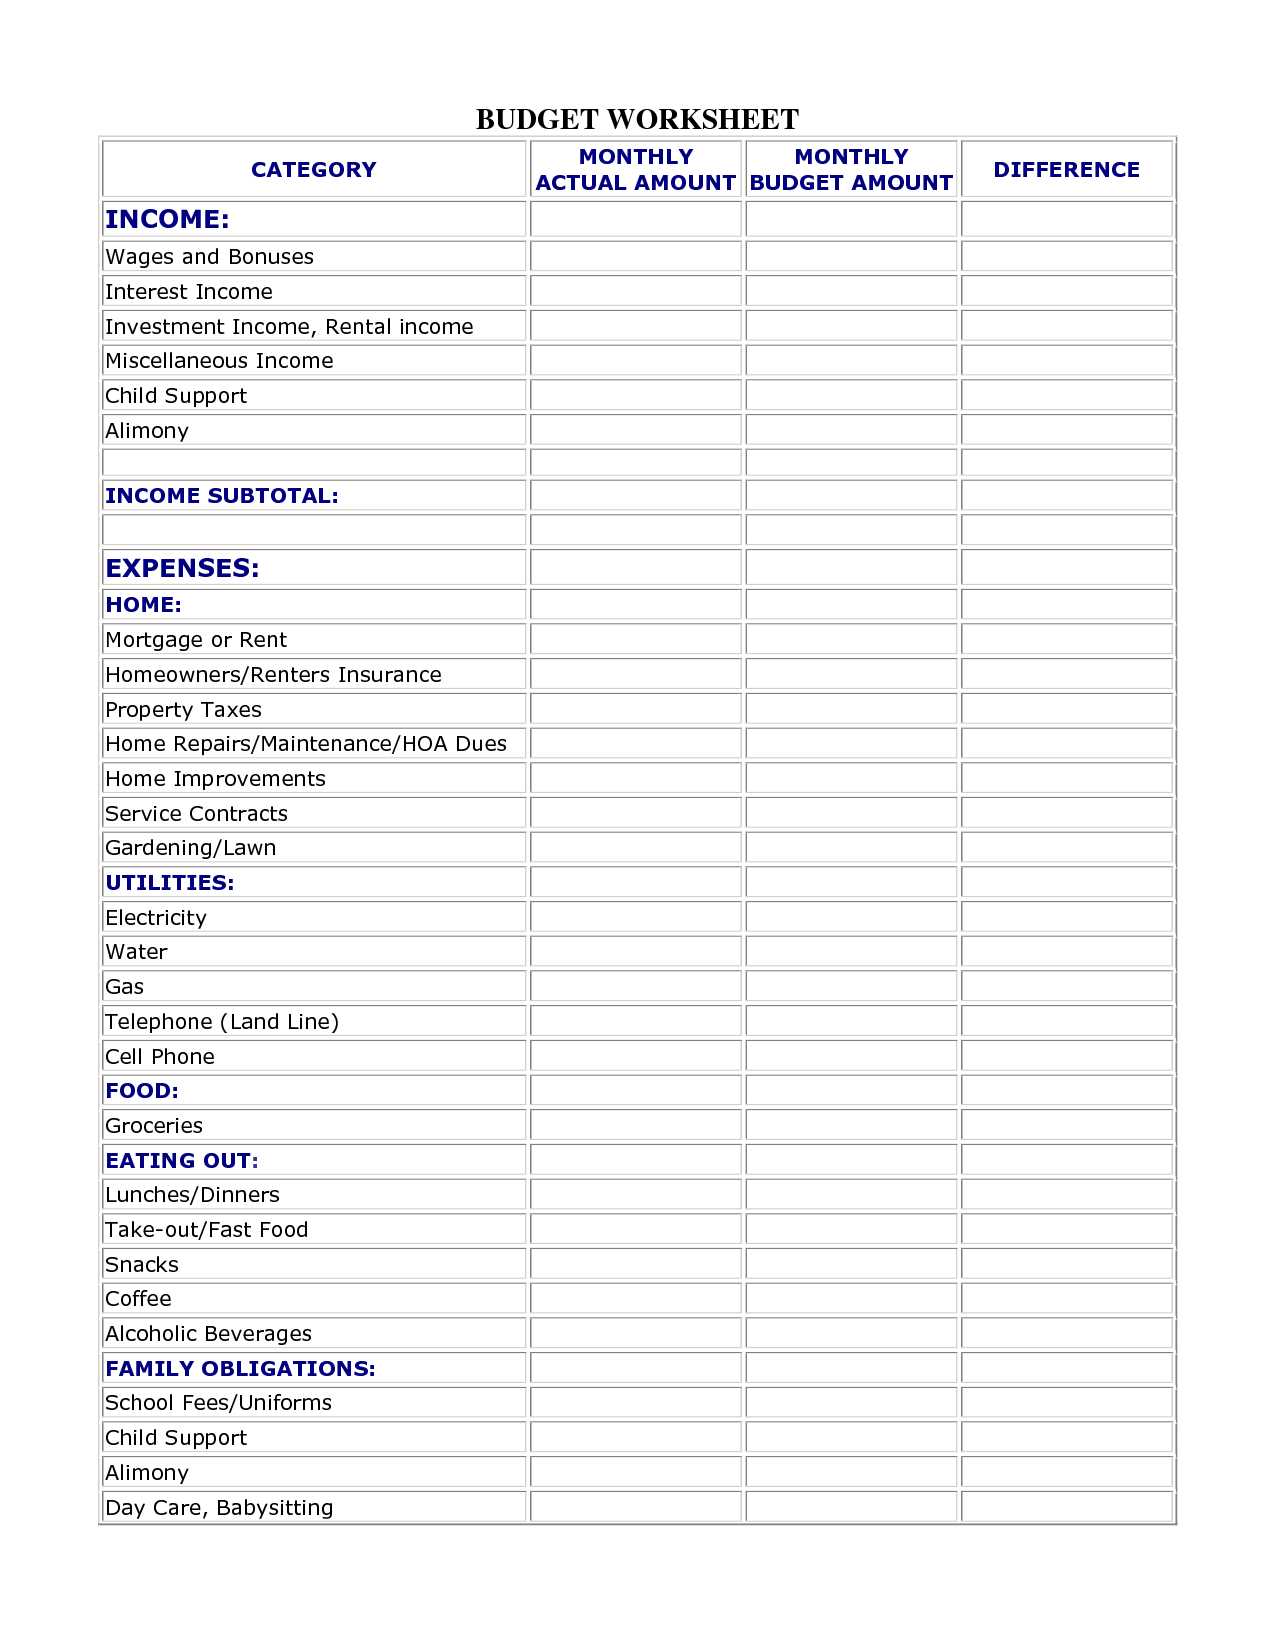 Free Printable Budget Binder Worksheets together with Spreadsheet Fresh Bud Ing Spreadsheets Full Hd Wallpaper